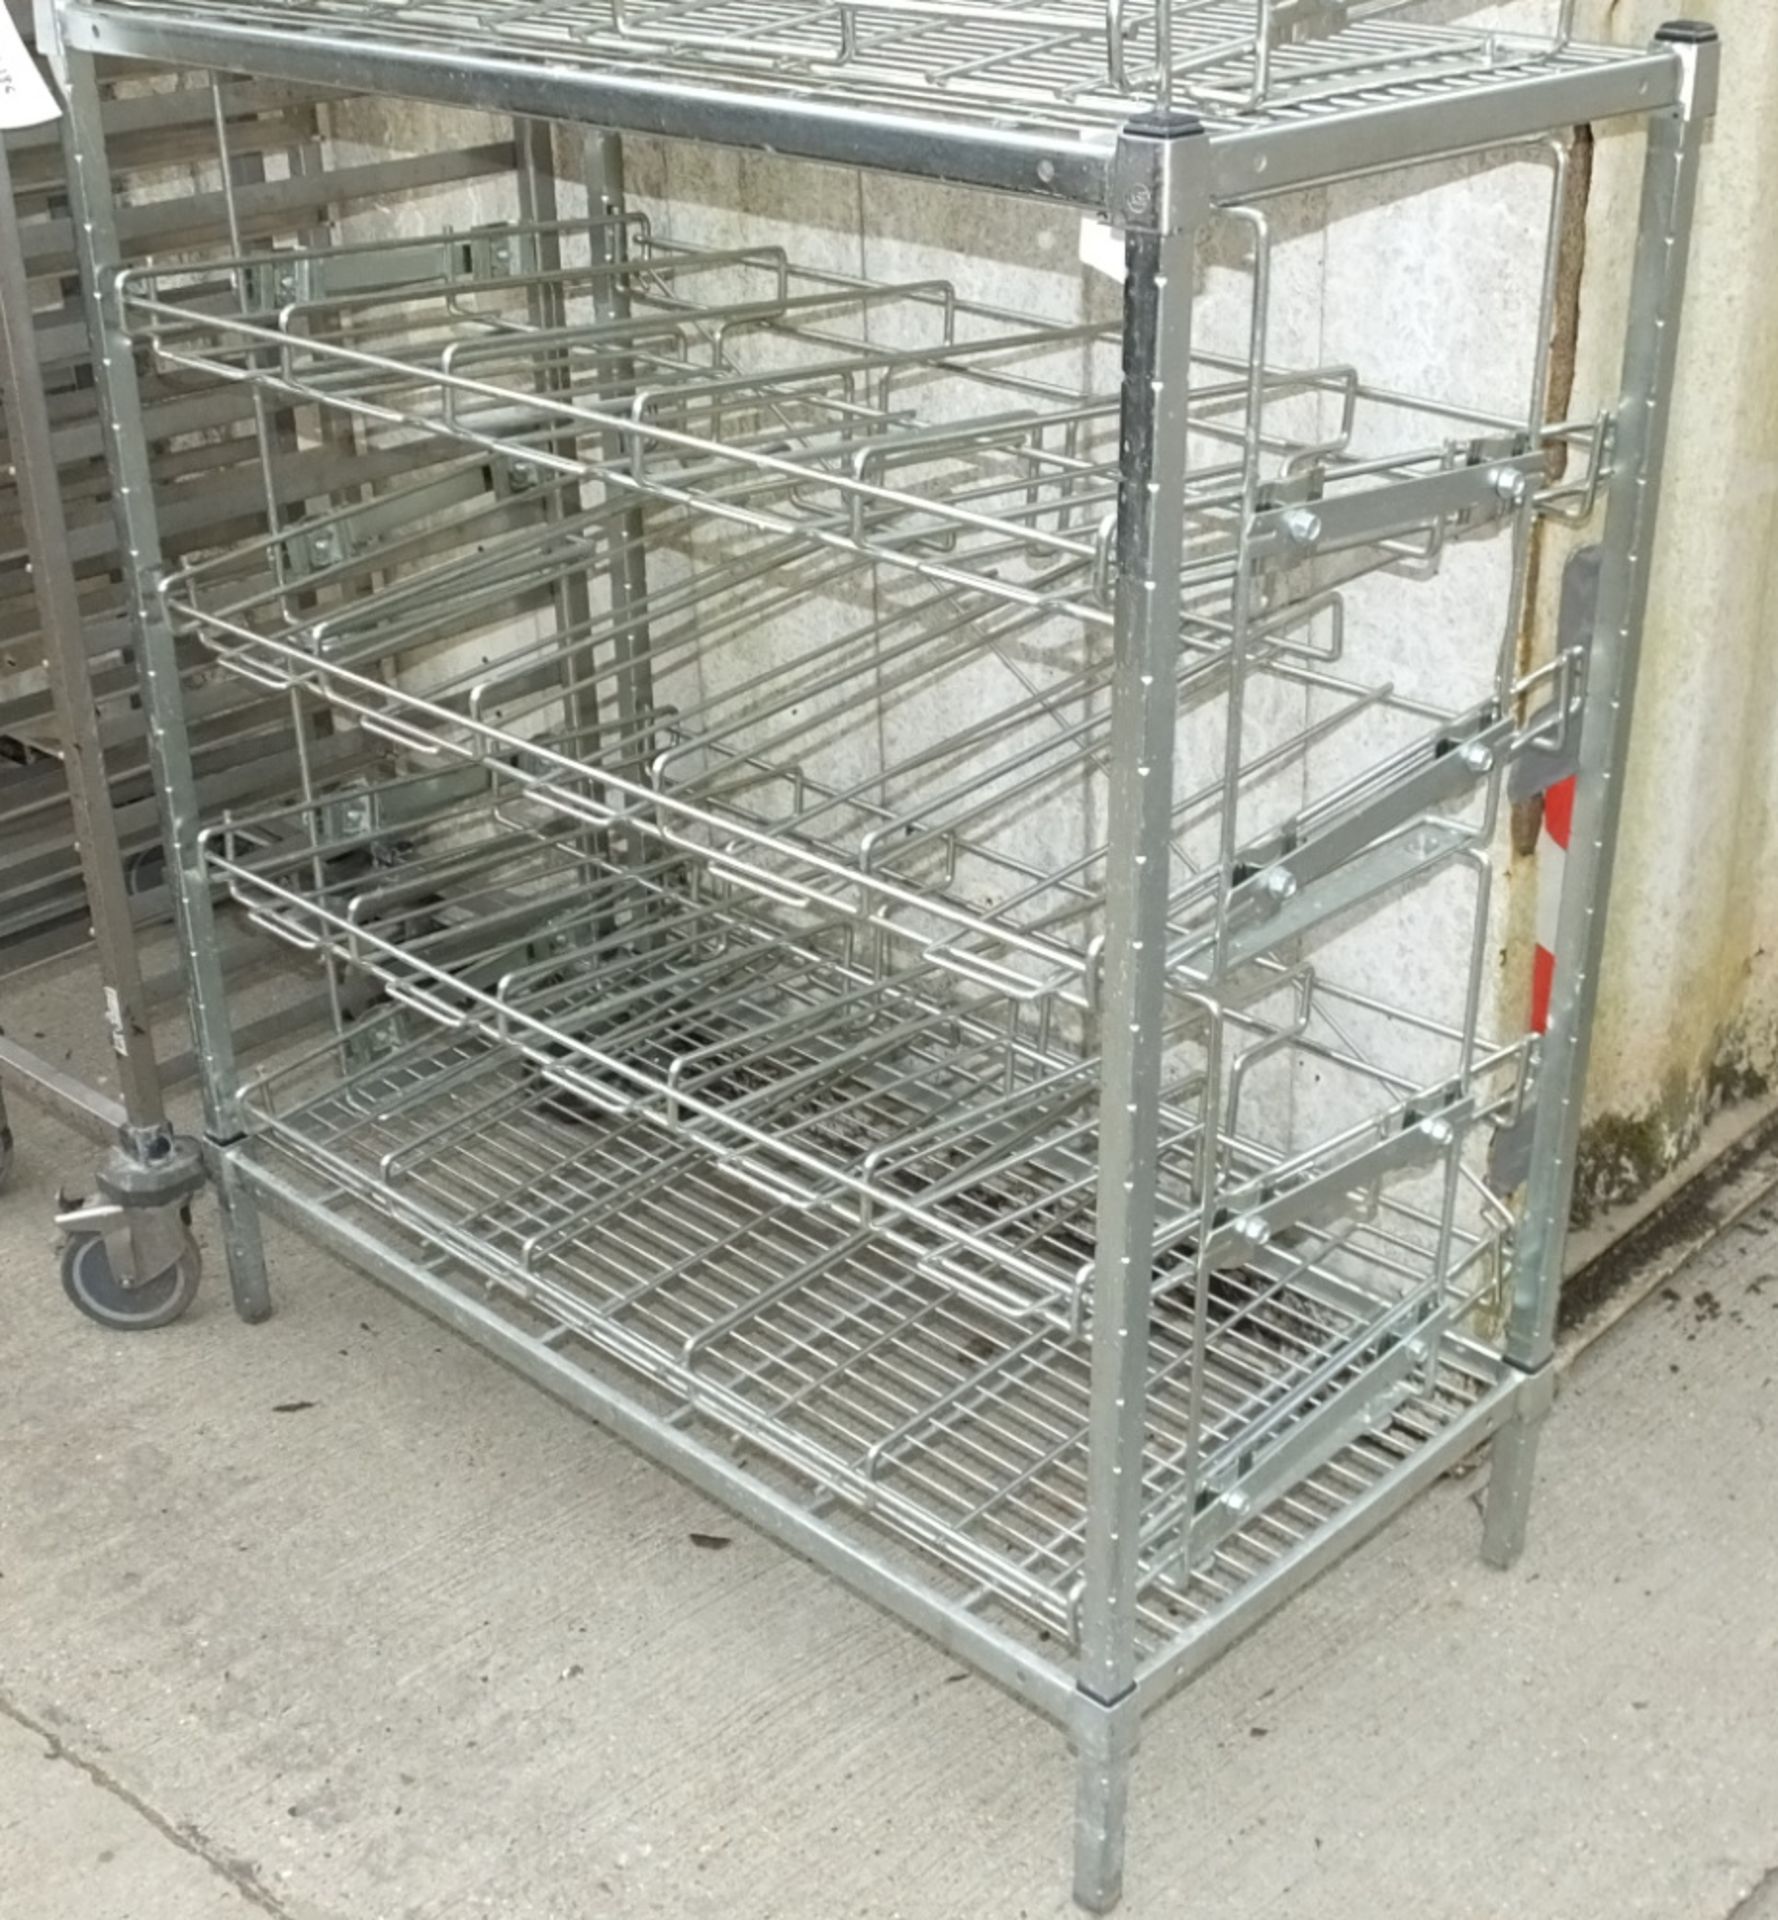 6 tier wire racking 110 x 55 x 160 - Image 3 of 3